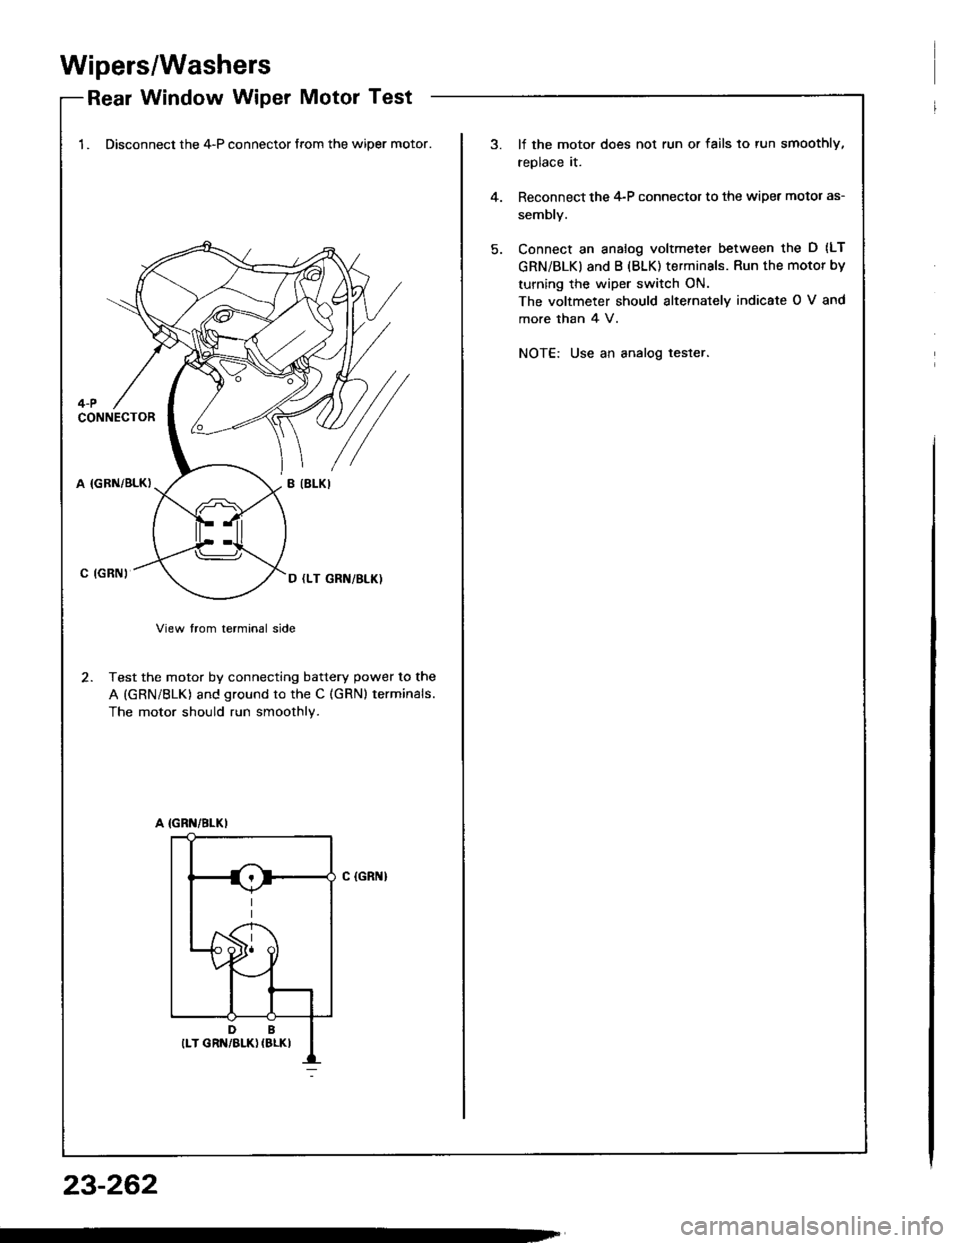 HONDA INTEGRA 1994 4.G User Guide Wipers/Washers
Rear Window Wiper Motor Test-Keal wlnqow wlper |Yloror I esr
1. Disconnect the 4-P connector from the wiper motor.lf the moto. does not run or fails to tun smoothly,
replace it.
Reconne